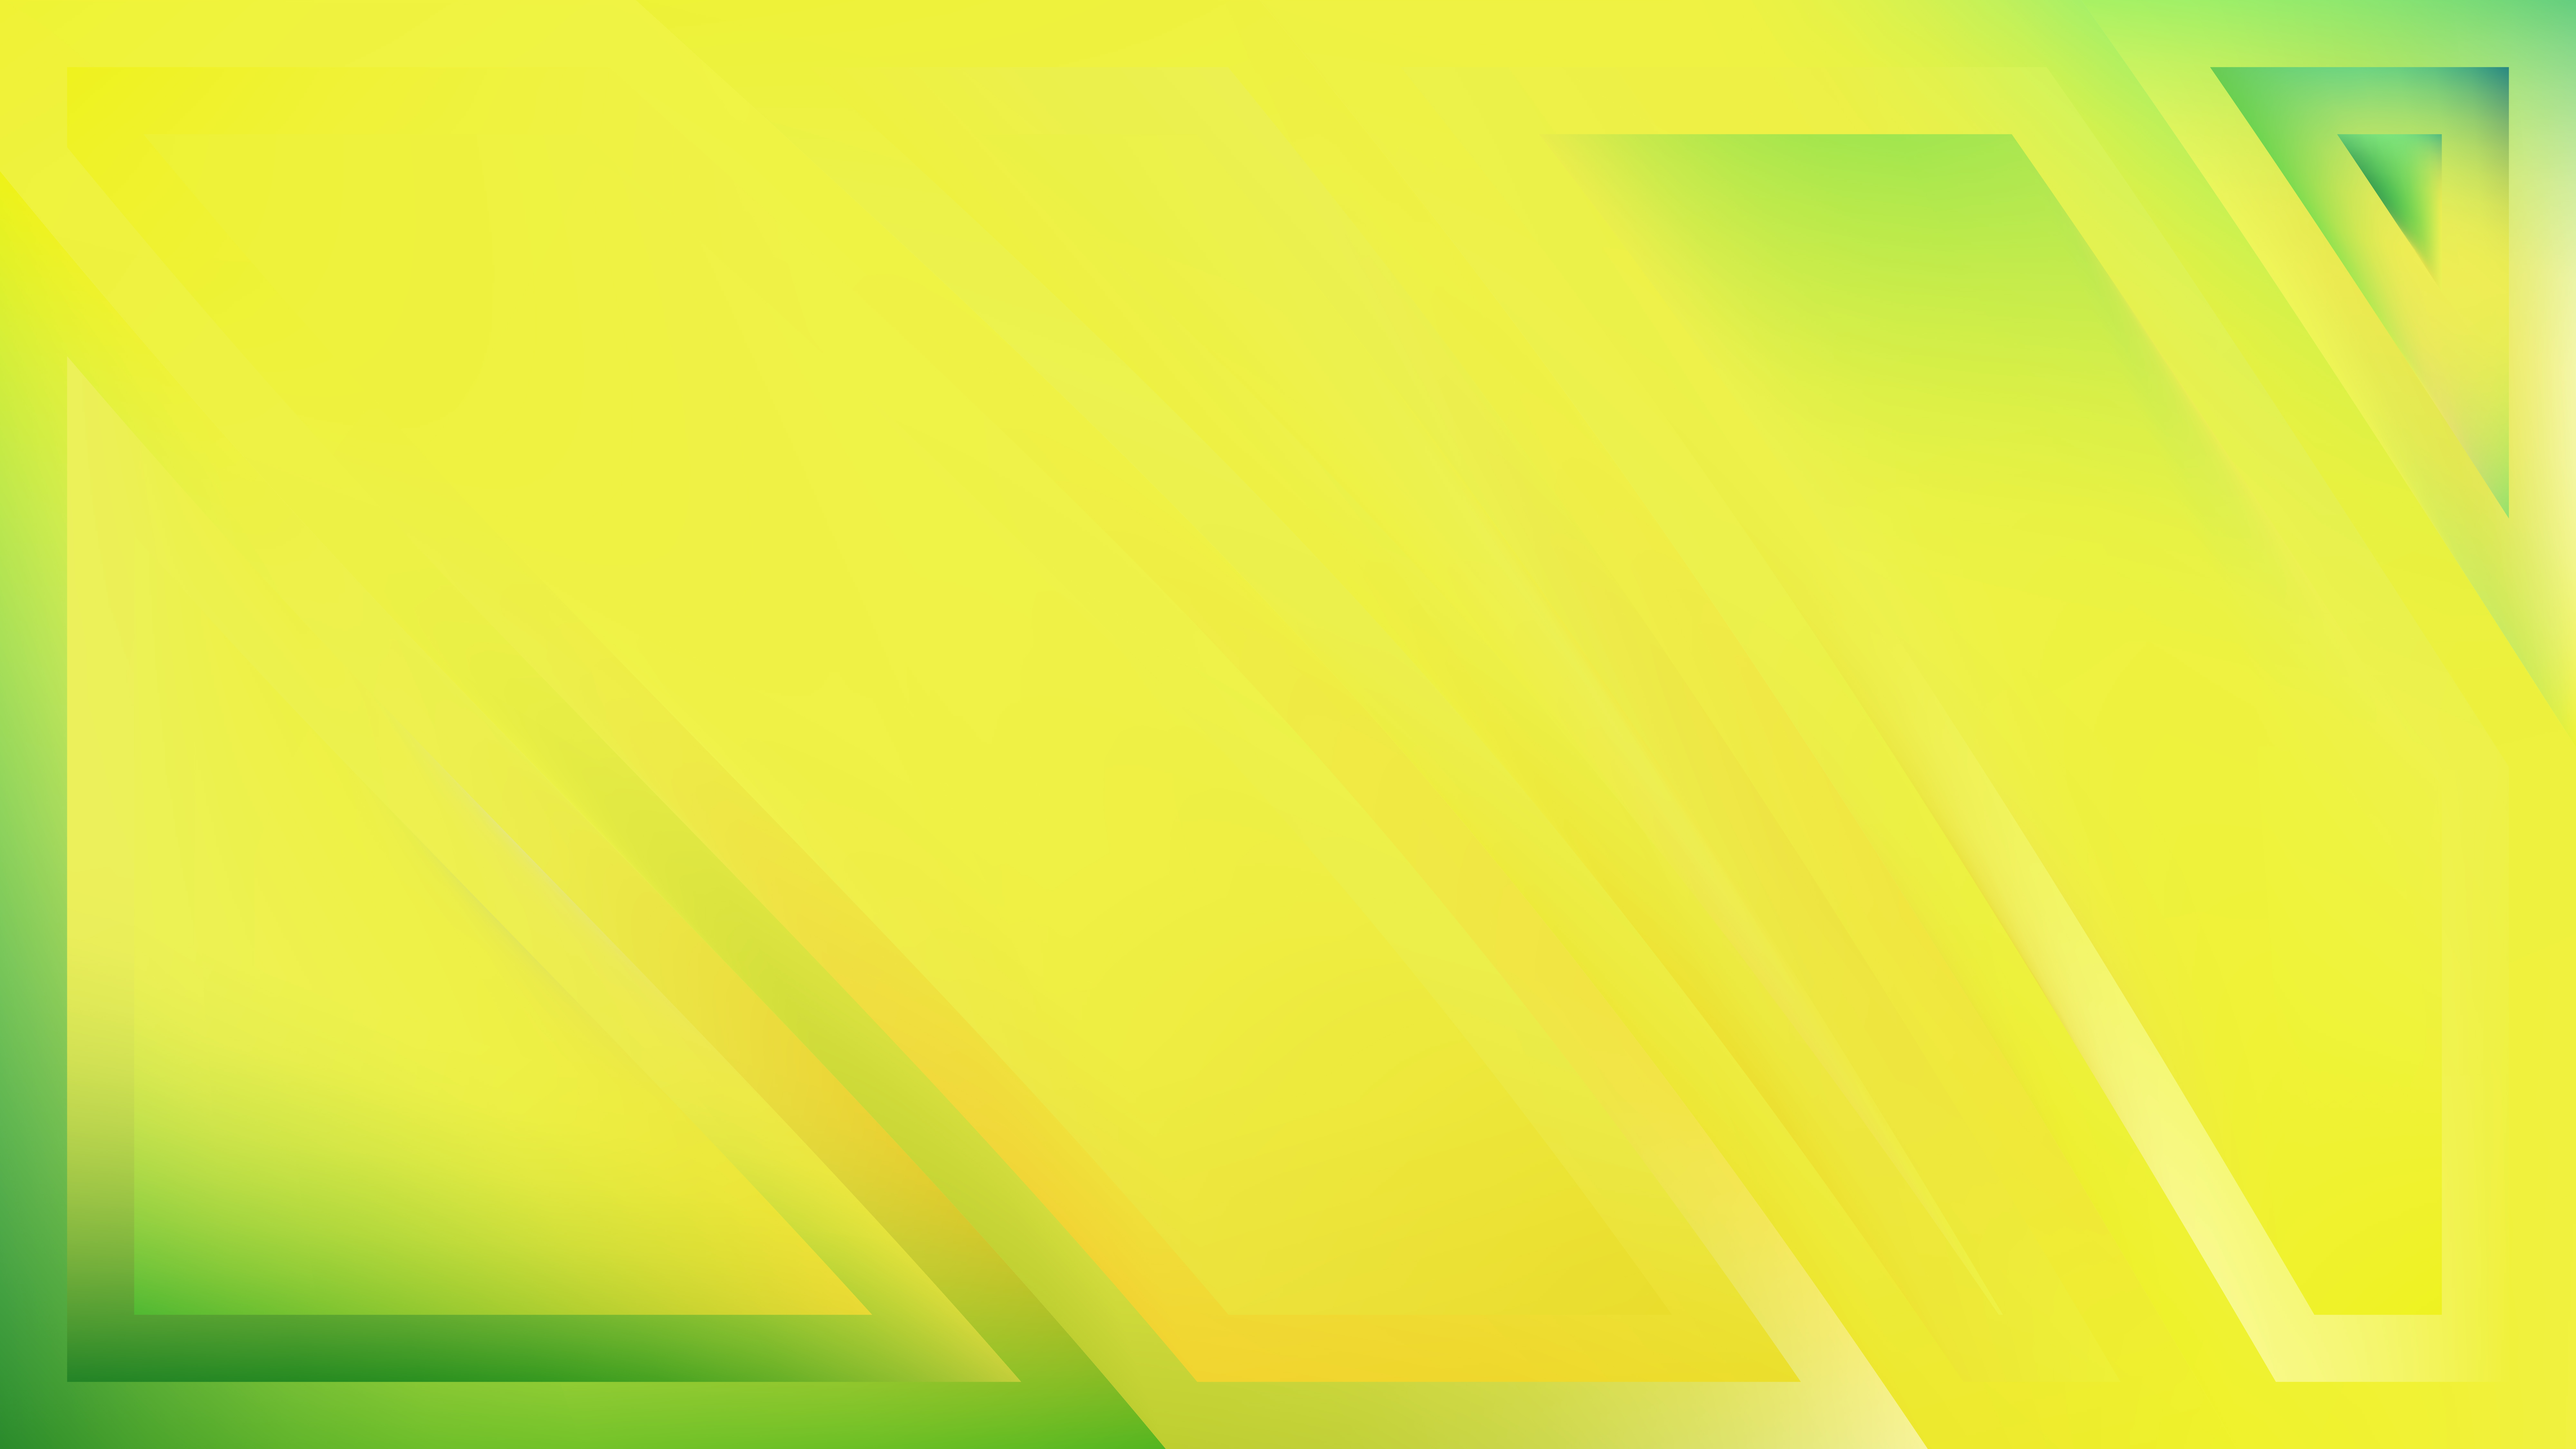 Free Green and Yellow Abstract Background Image